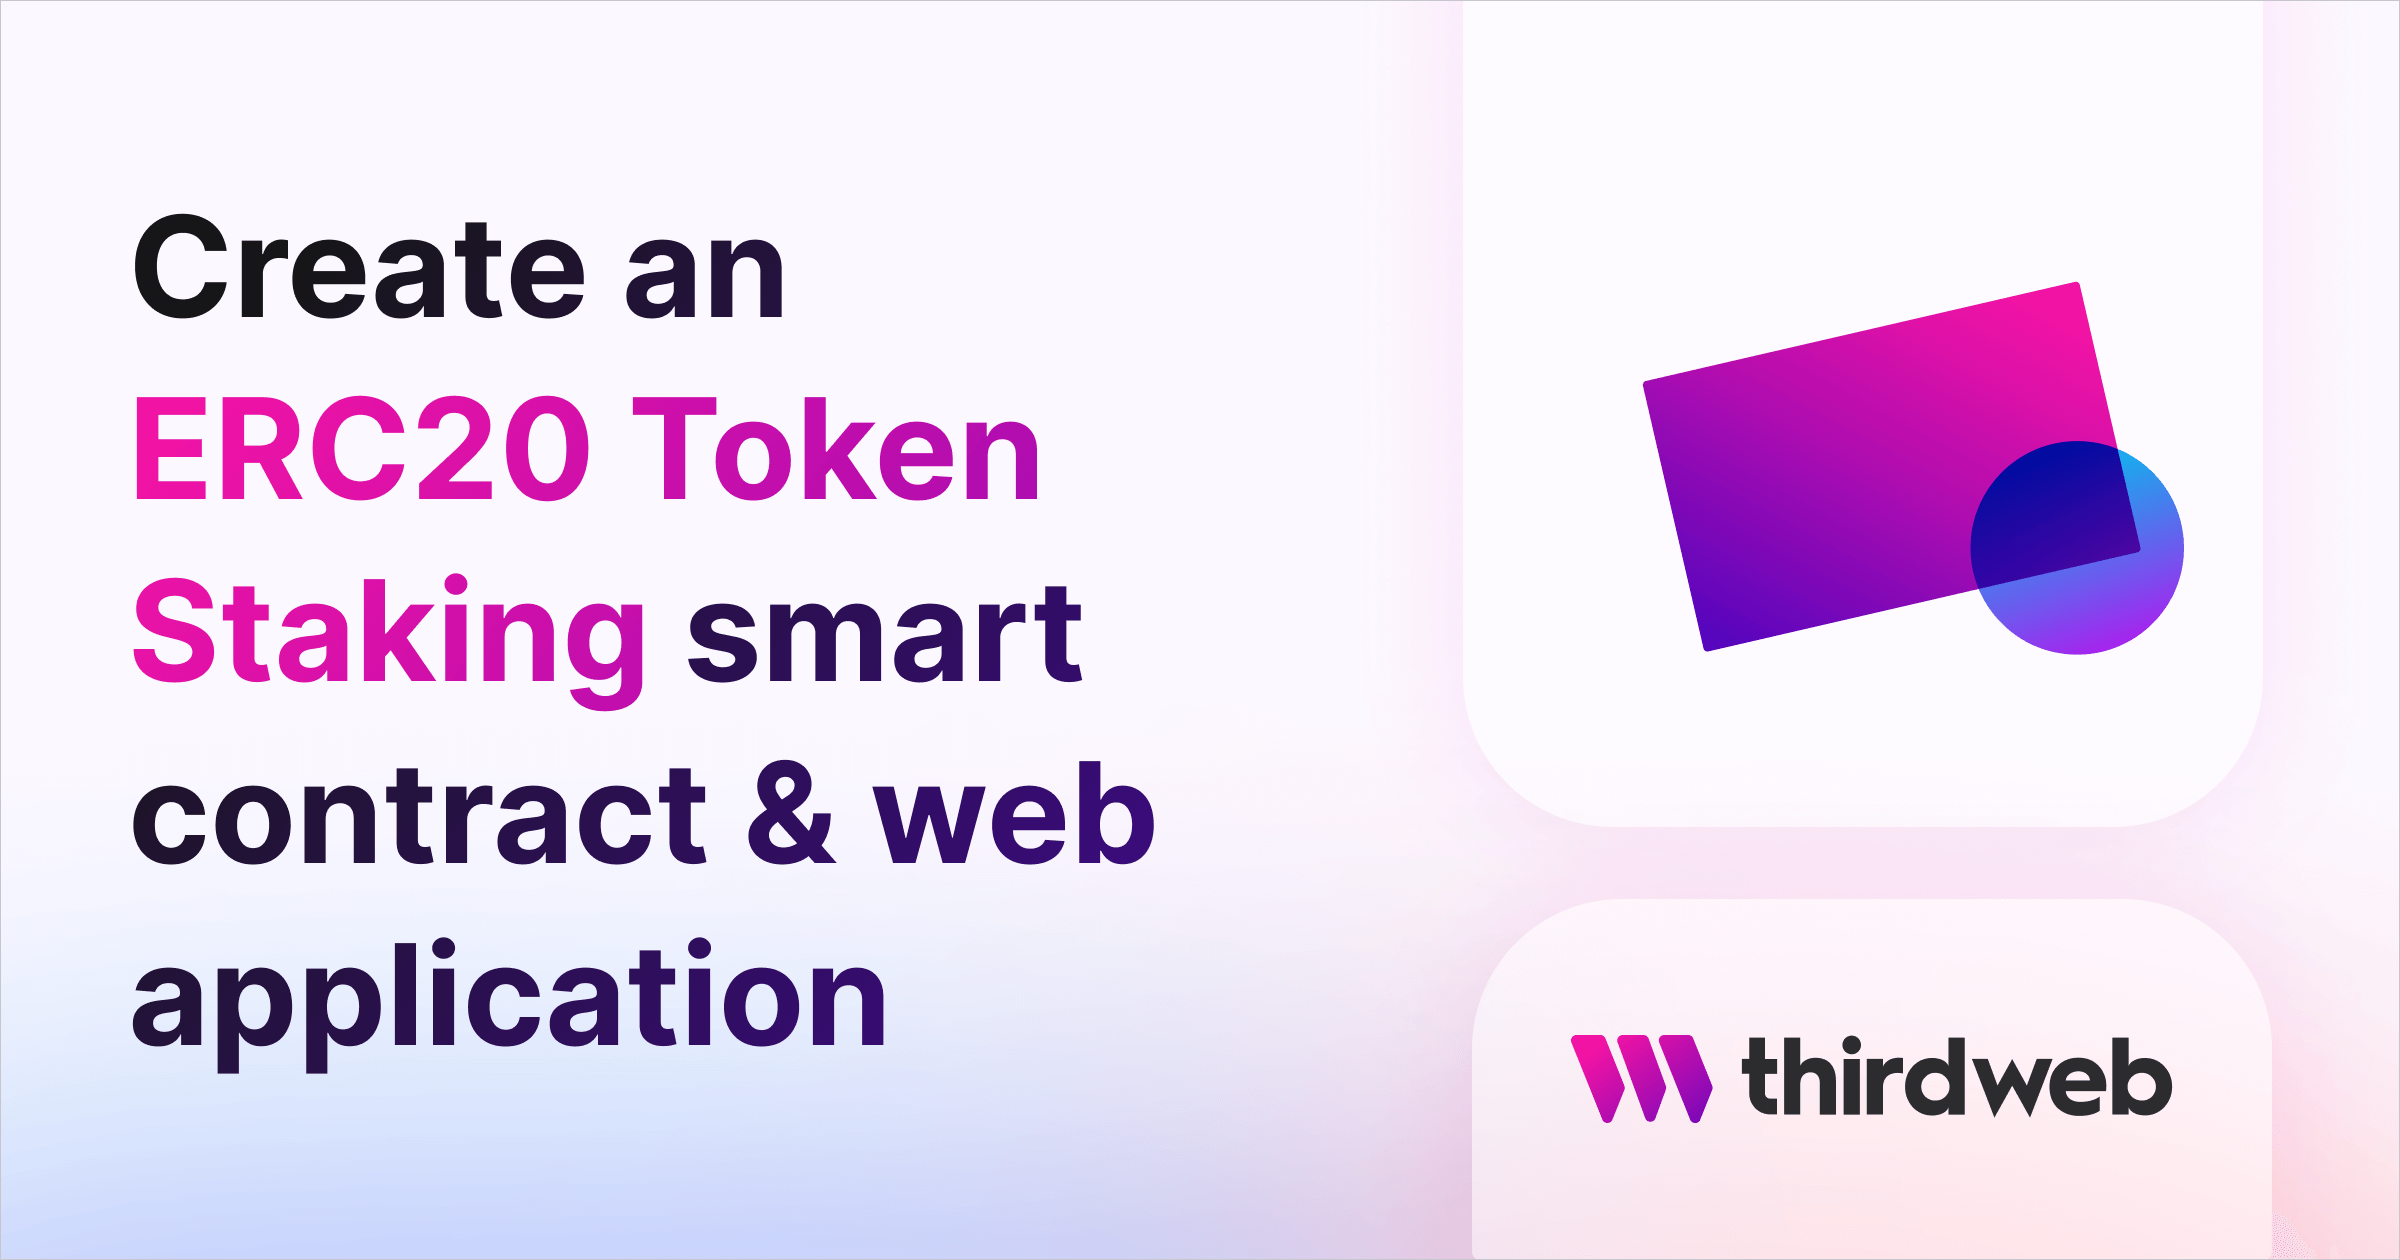 How to Build An ERC20 Staking Smart Contract & Web Application - thirdweb Guides